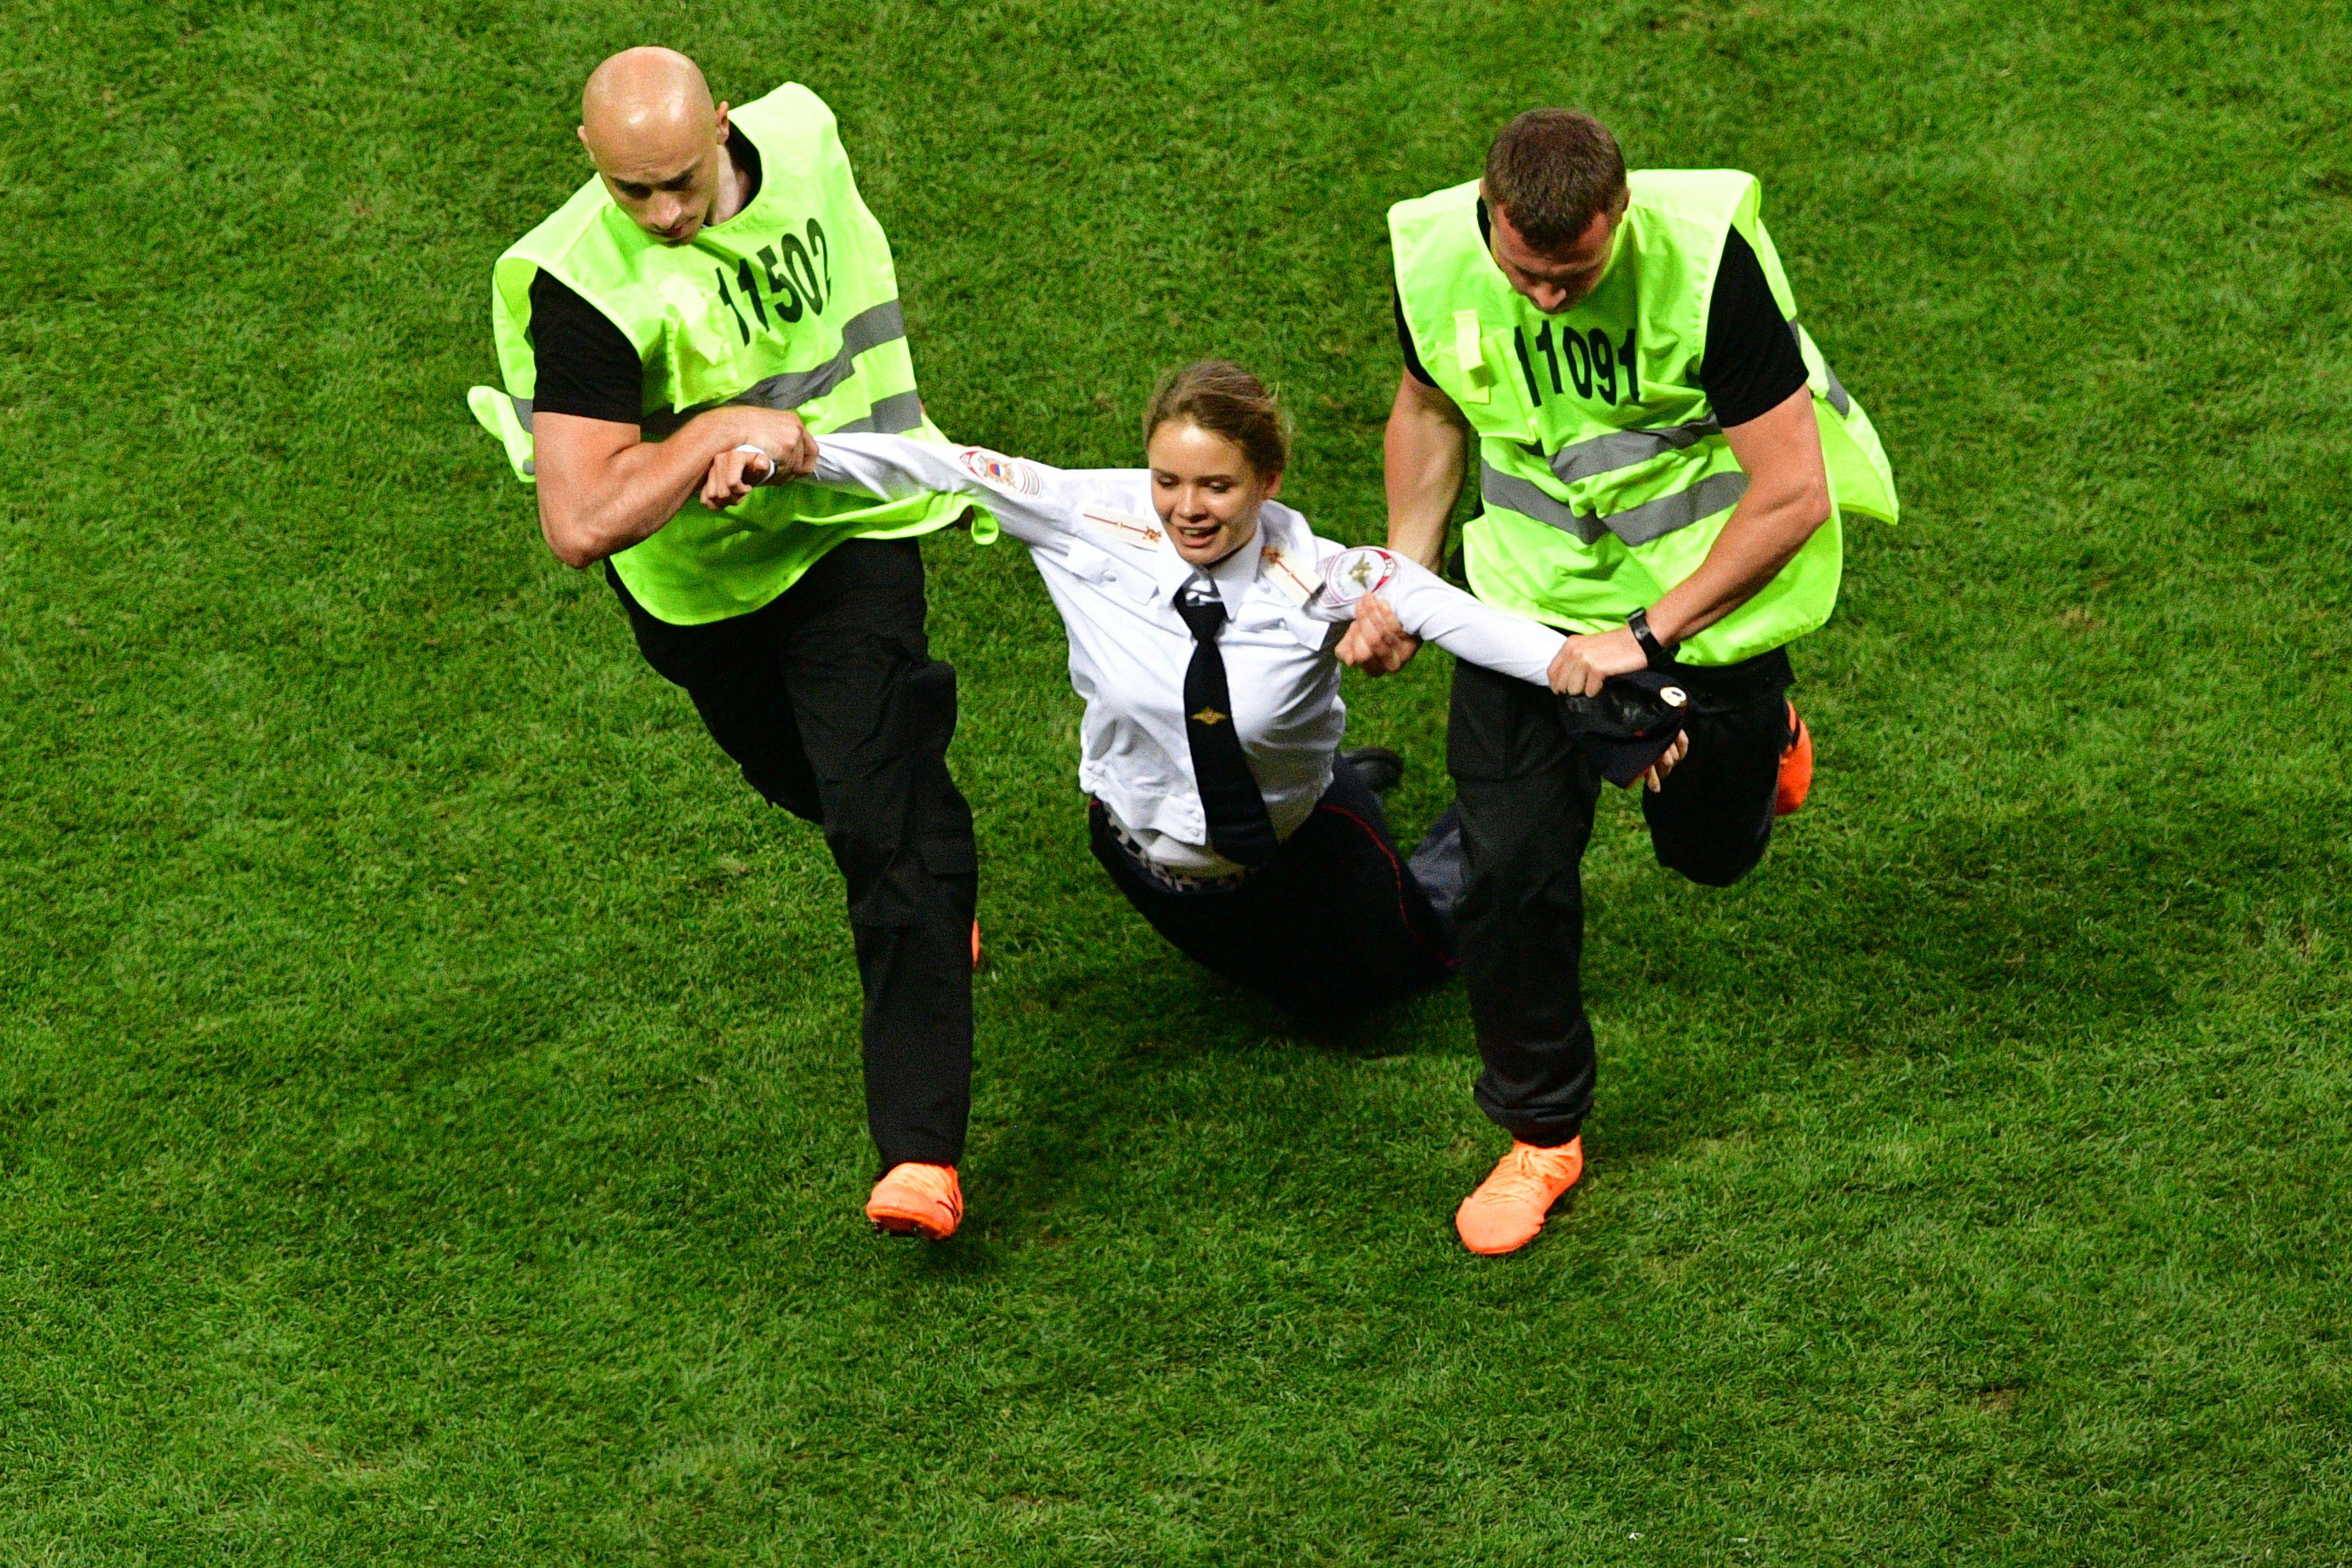 Stewards remove a pitch invader during the Russia 2018 World Cup final football match between France and Croatia at the Luzhniki Stadium in Moscow on July 15, 2018. (Photo by Mladen ANTONOV / AFP) / RESTRICTED TO EDITORIAL USE - NO MOBILE PUSH ALERTS/DOWNLOADS        (Photo credit should read MLADEN ANTONOV/AFP/Getty Images)